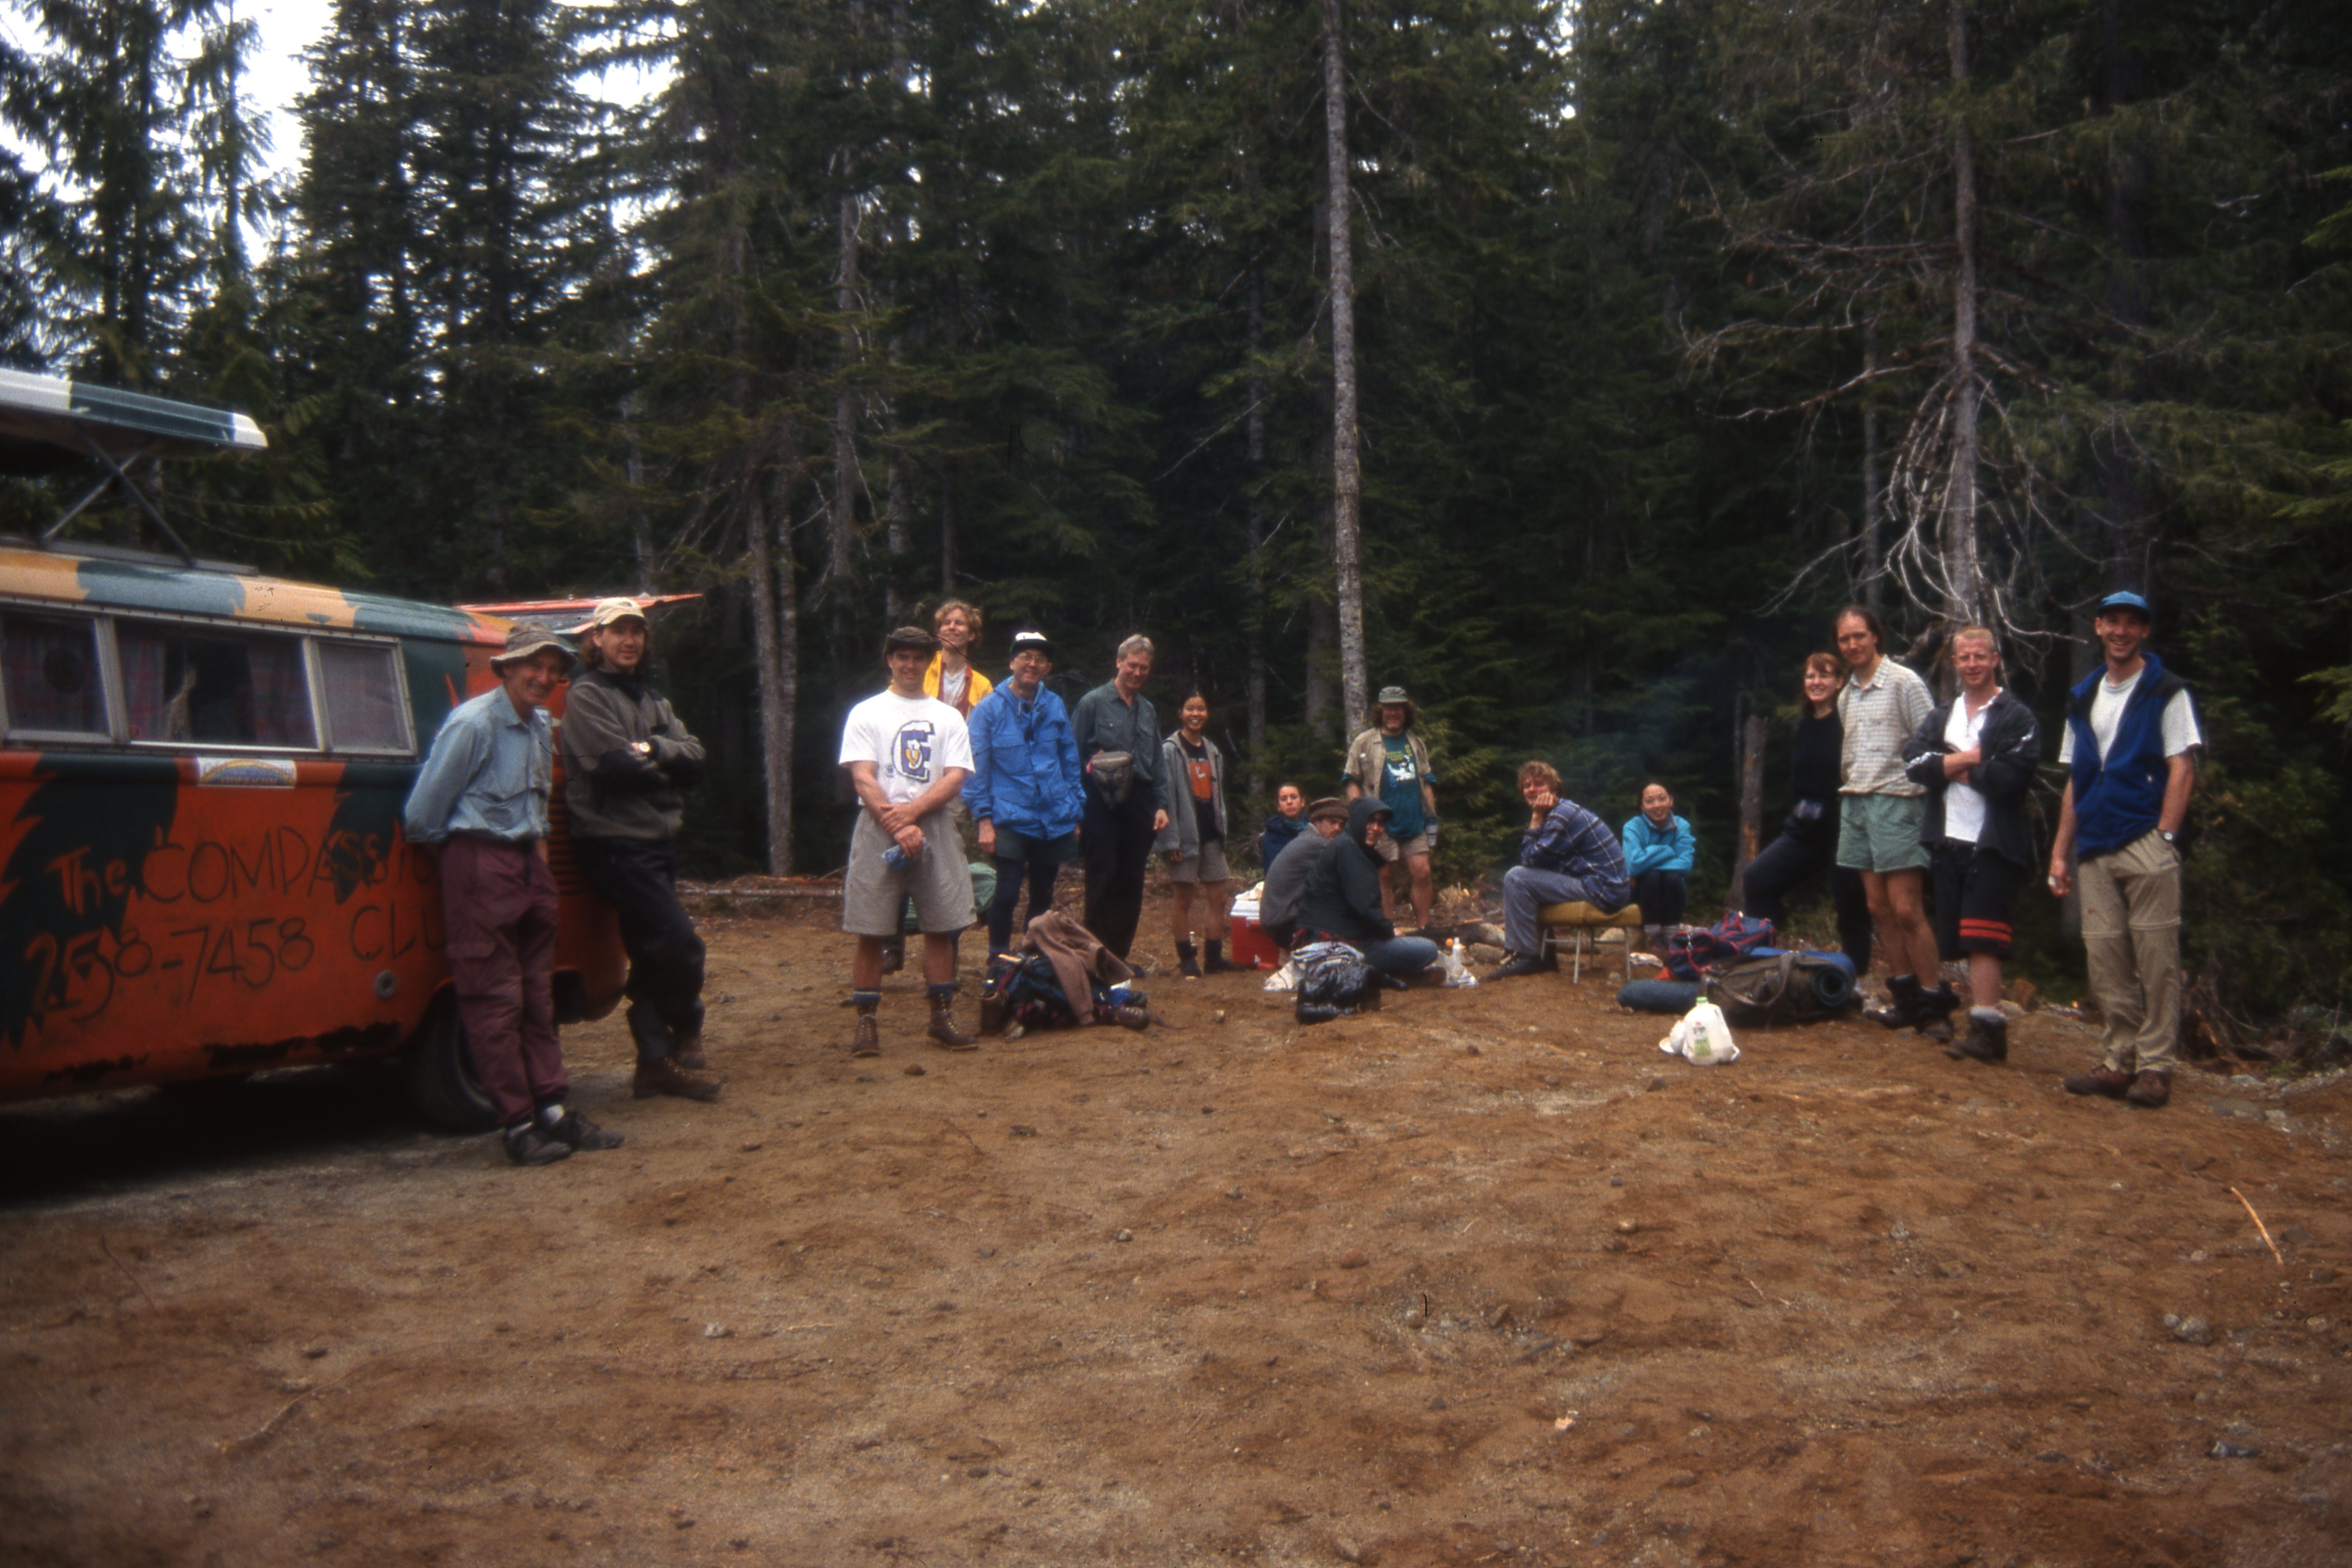 A group of people gathered in a dirt clearing, with an orange Volkswagen van on the left and forest in the background. This is at the Elaho trail head.